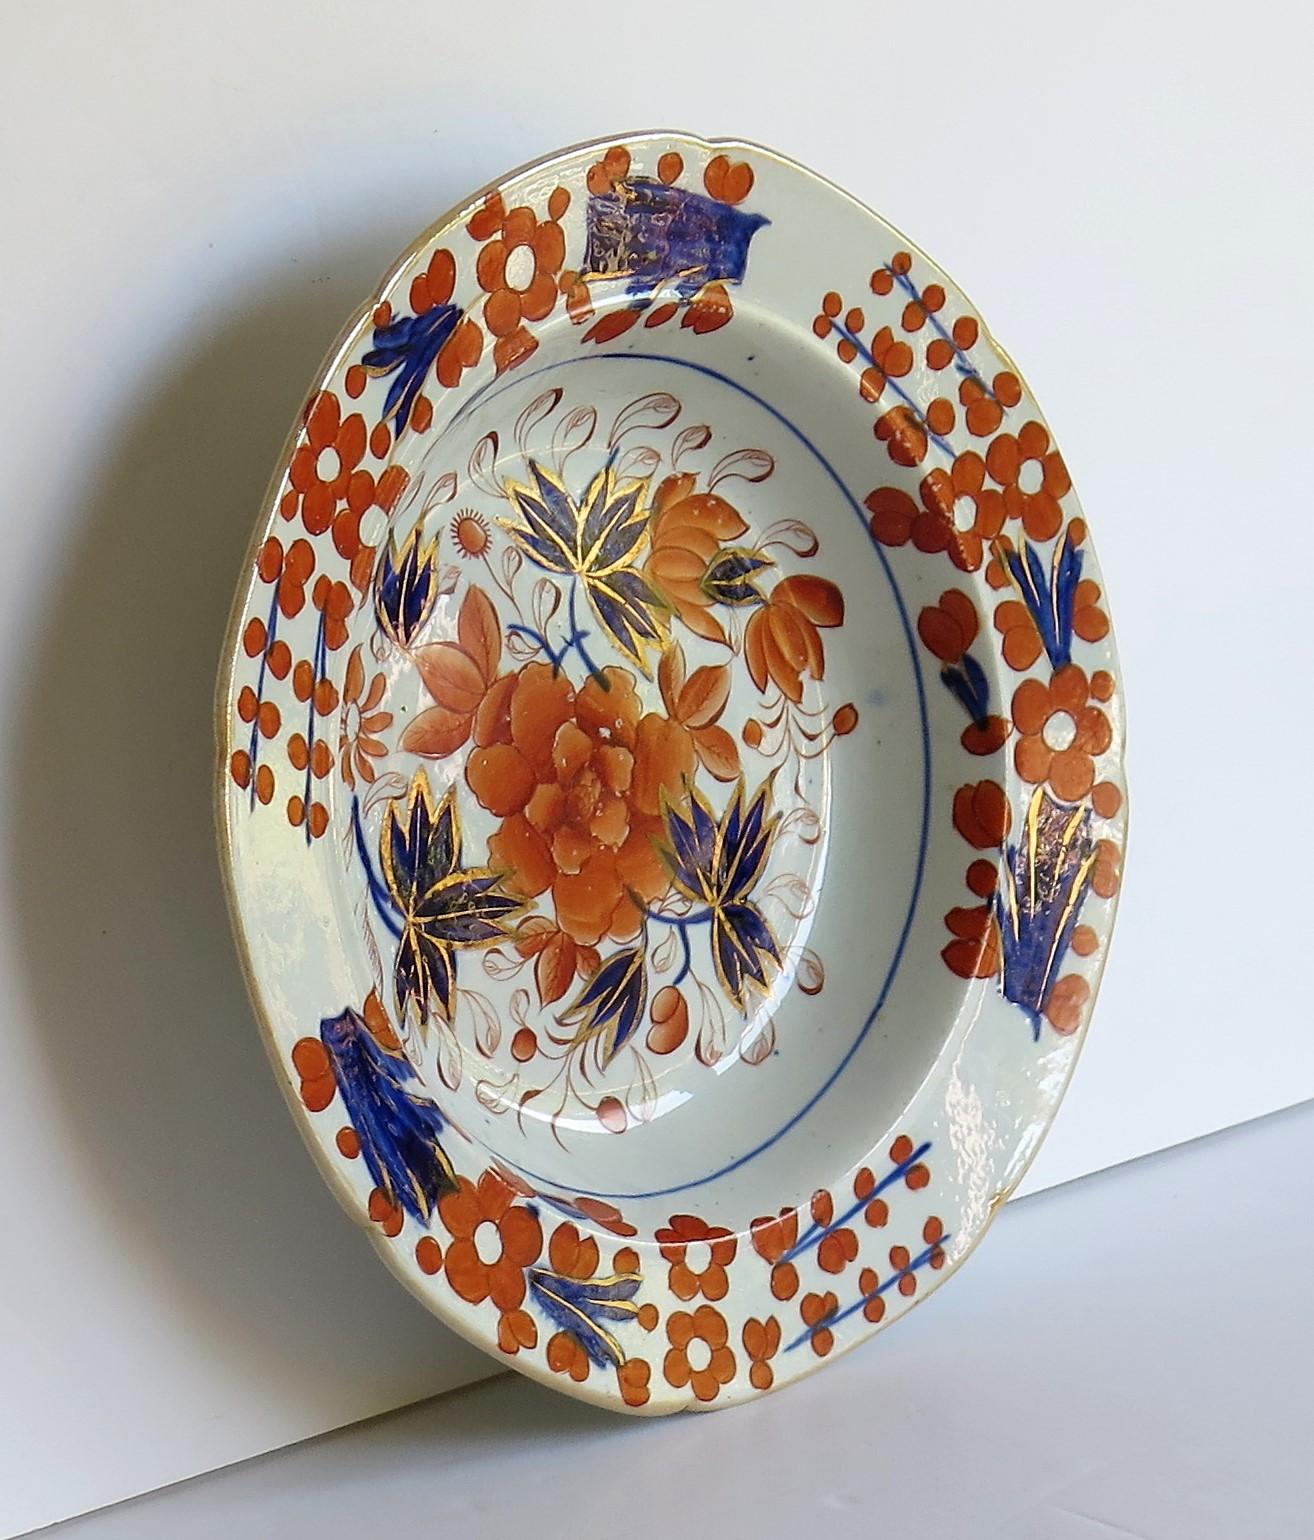 This is a very good early Mason's ironstone pottery soup bowl or deep plate hand painted in the striking Rose Japan pattern, which is one of the rarer seen patterns produced by the Mason's factory at Lane Delph, Staffordshire, England, circa